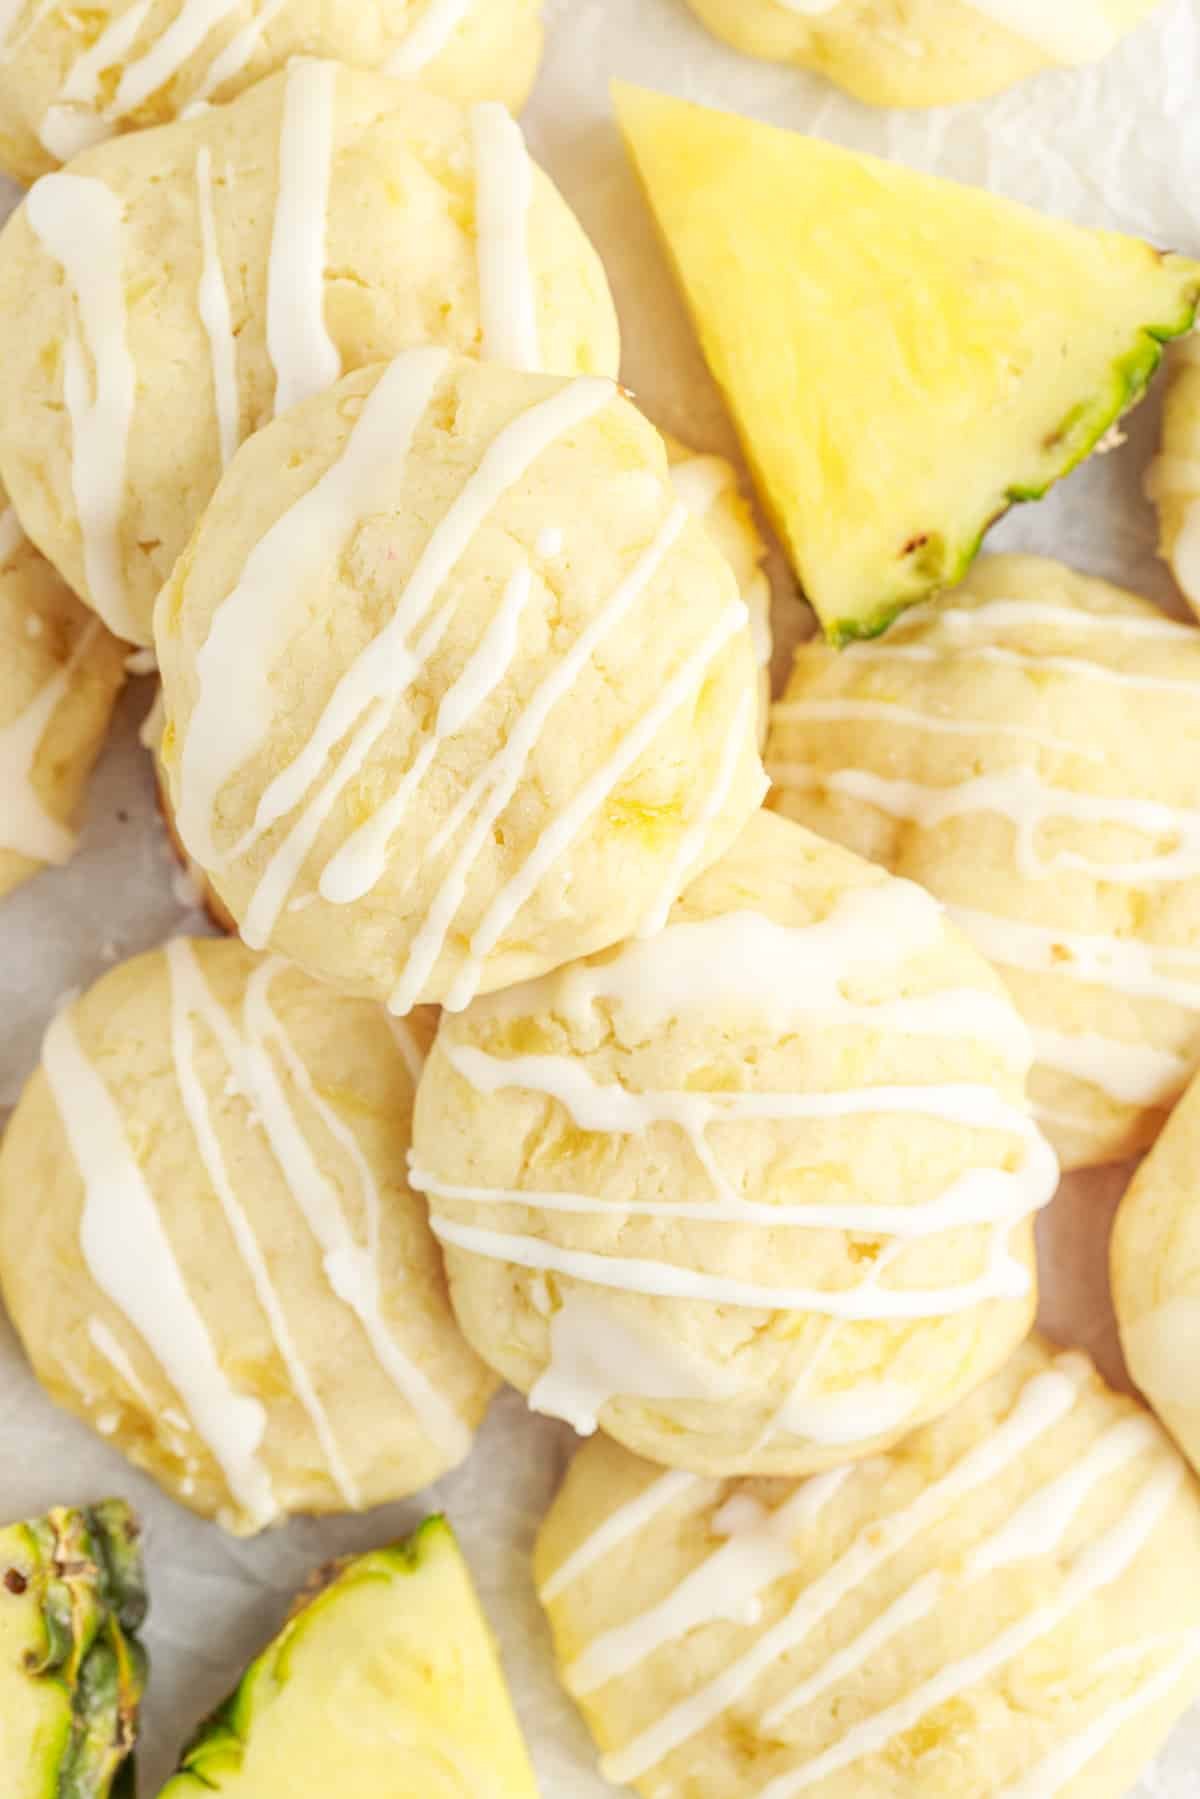 Overhead view of Pineapple Cookies next to slices of pineapple wedges.